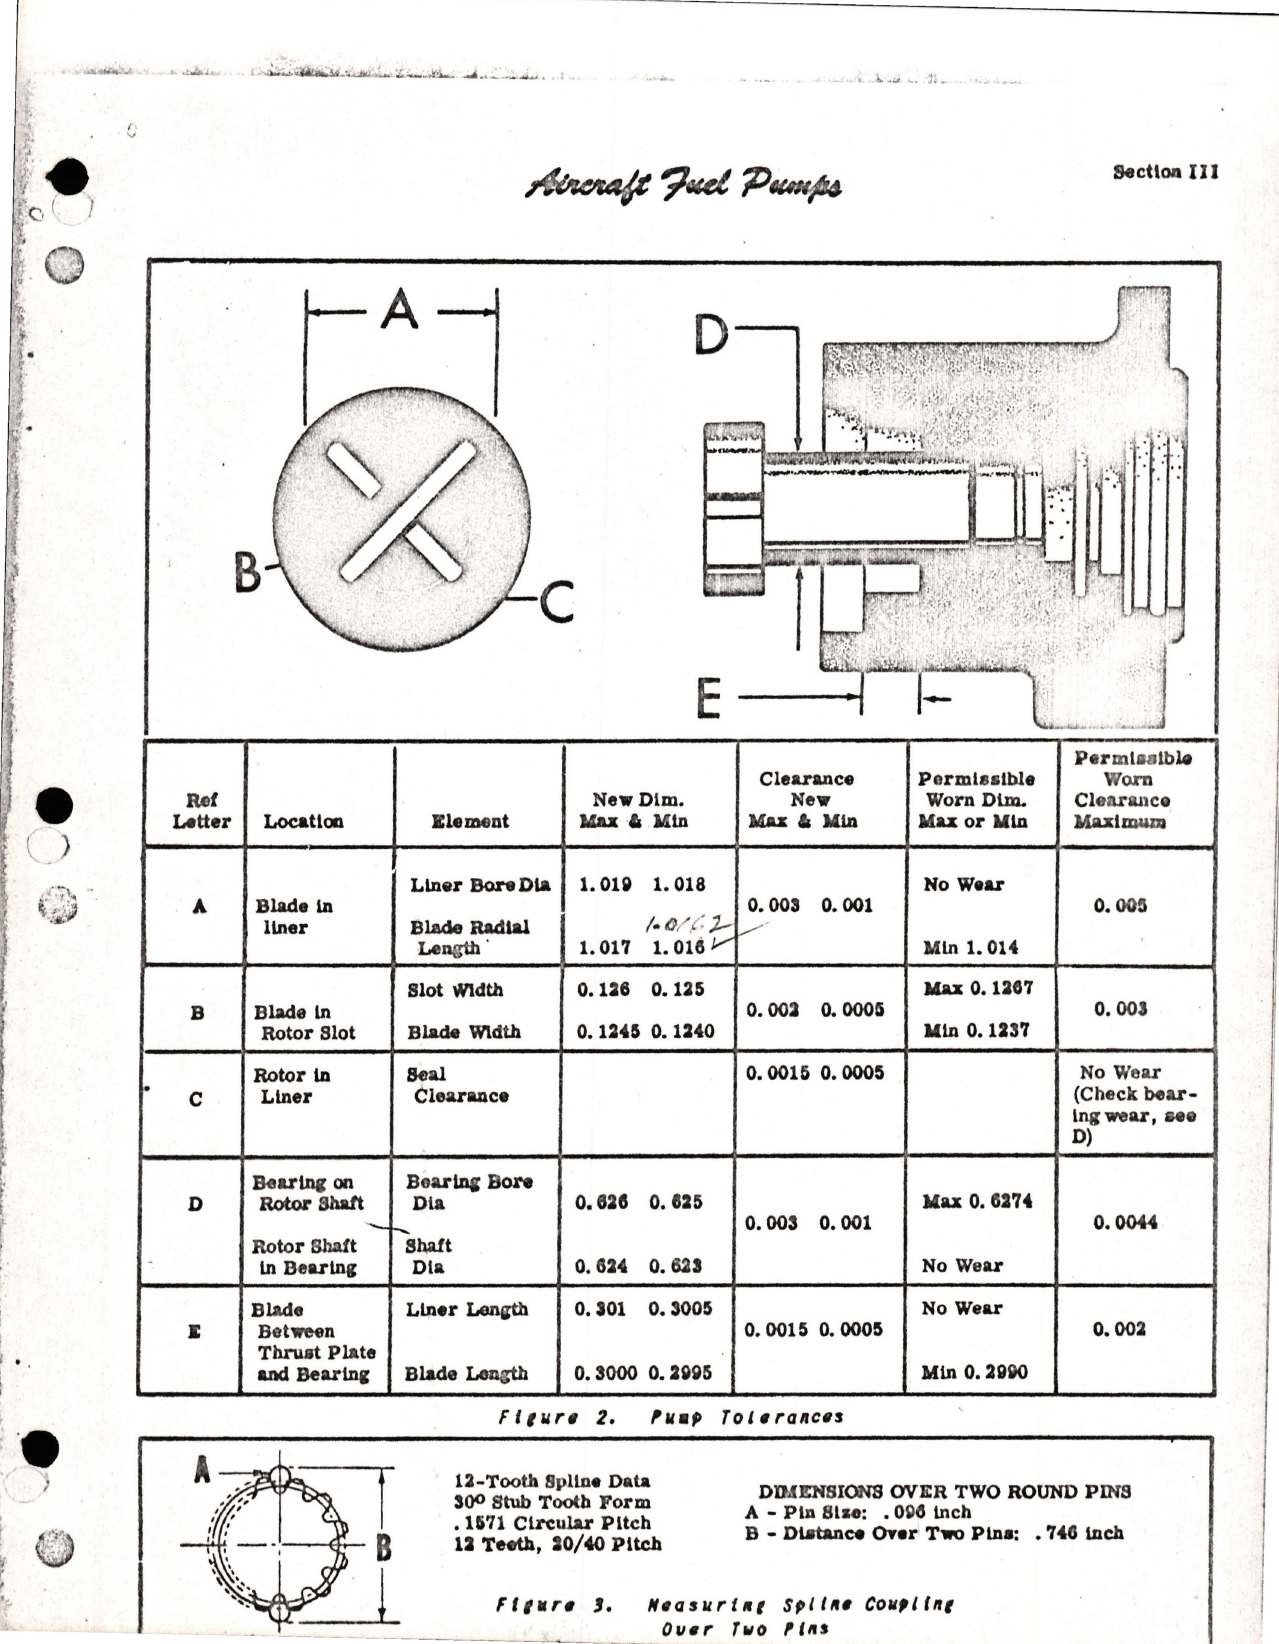 Sample page 7 from AirCorps Library document: Service and Overhaul Instructions with Parts Catalog for Aircraft Engine Fuel Pumps - Series RD-7420